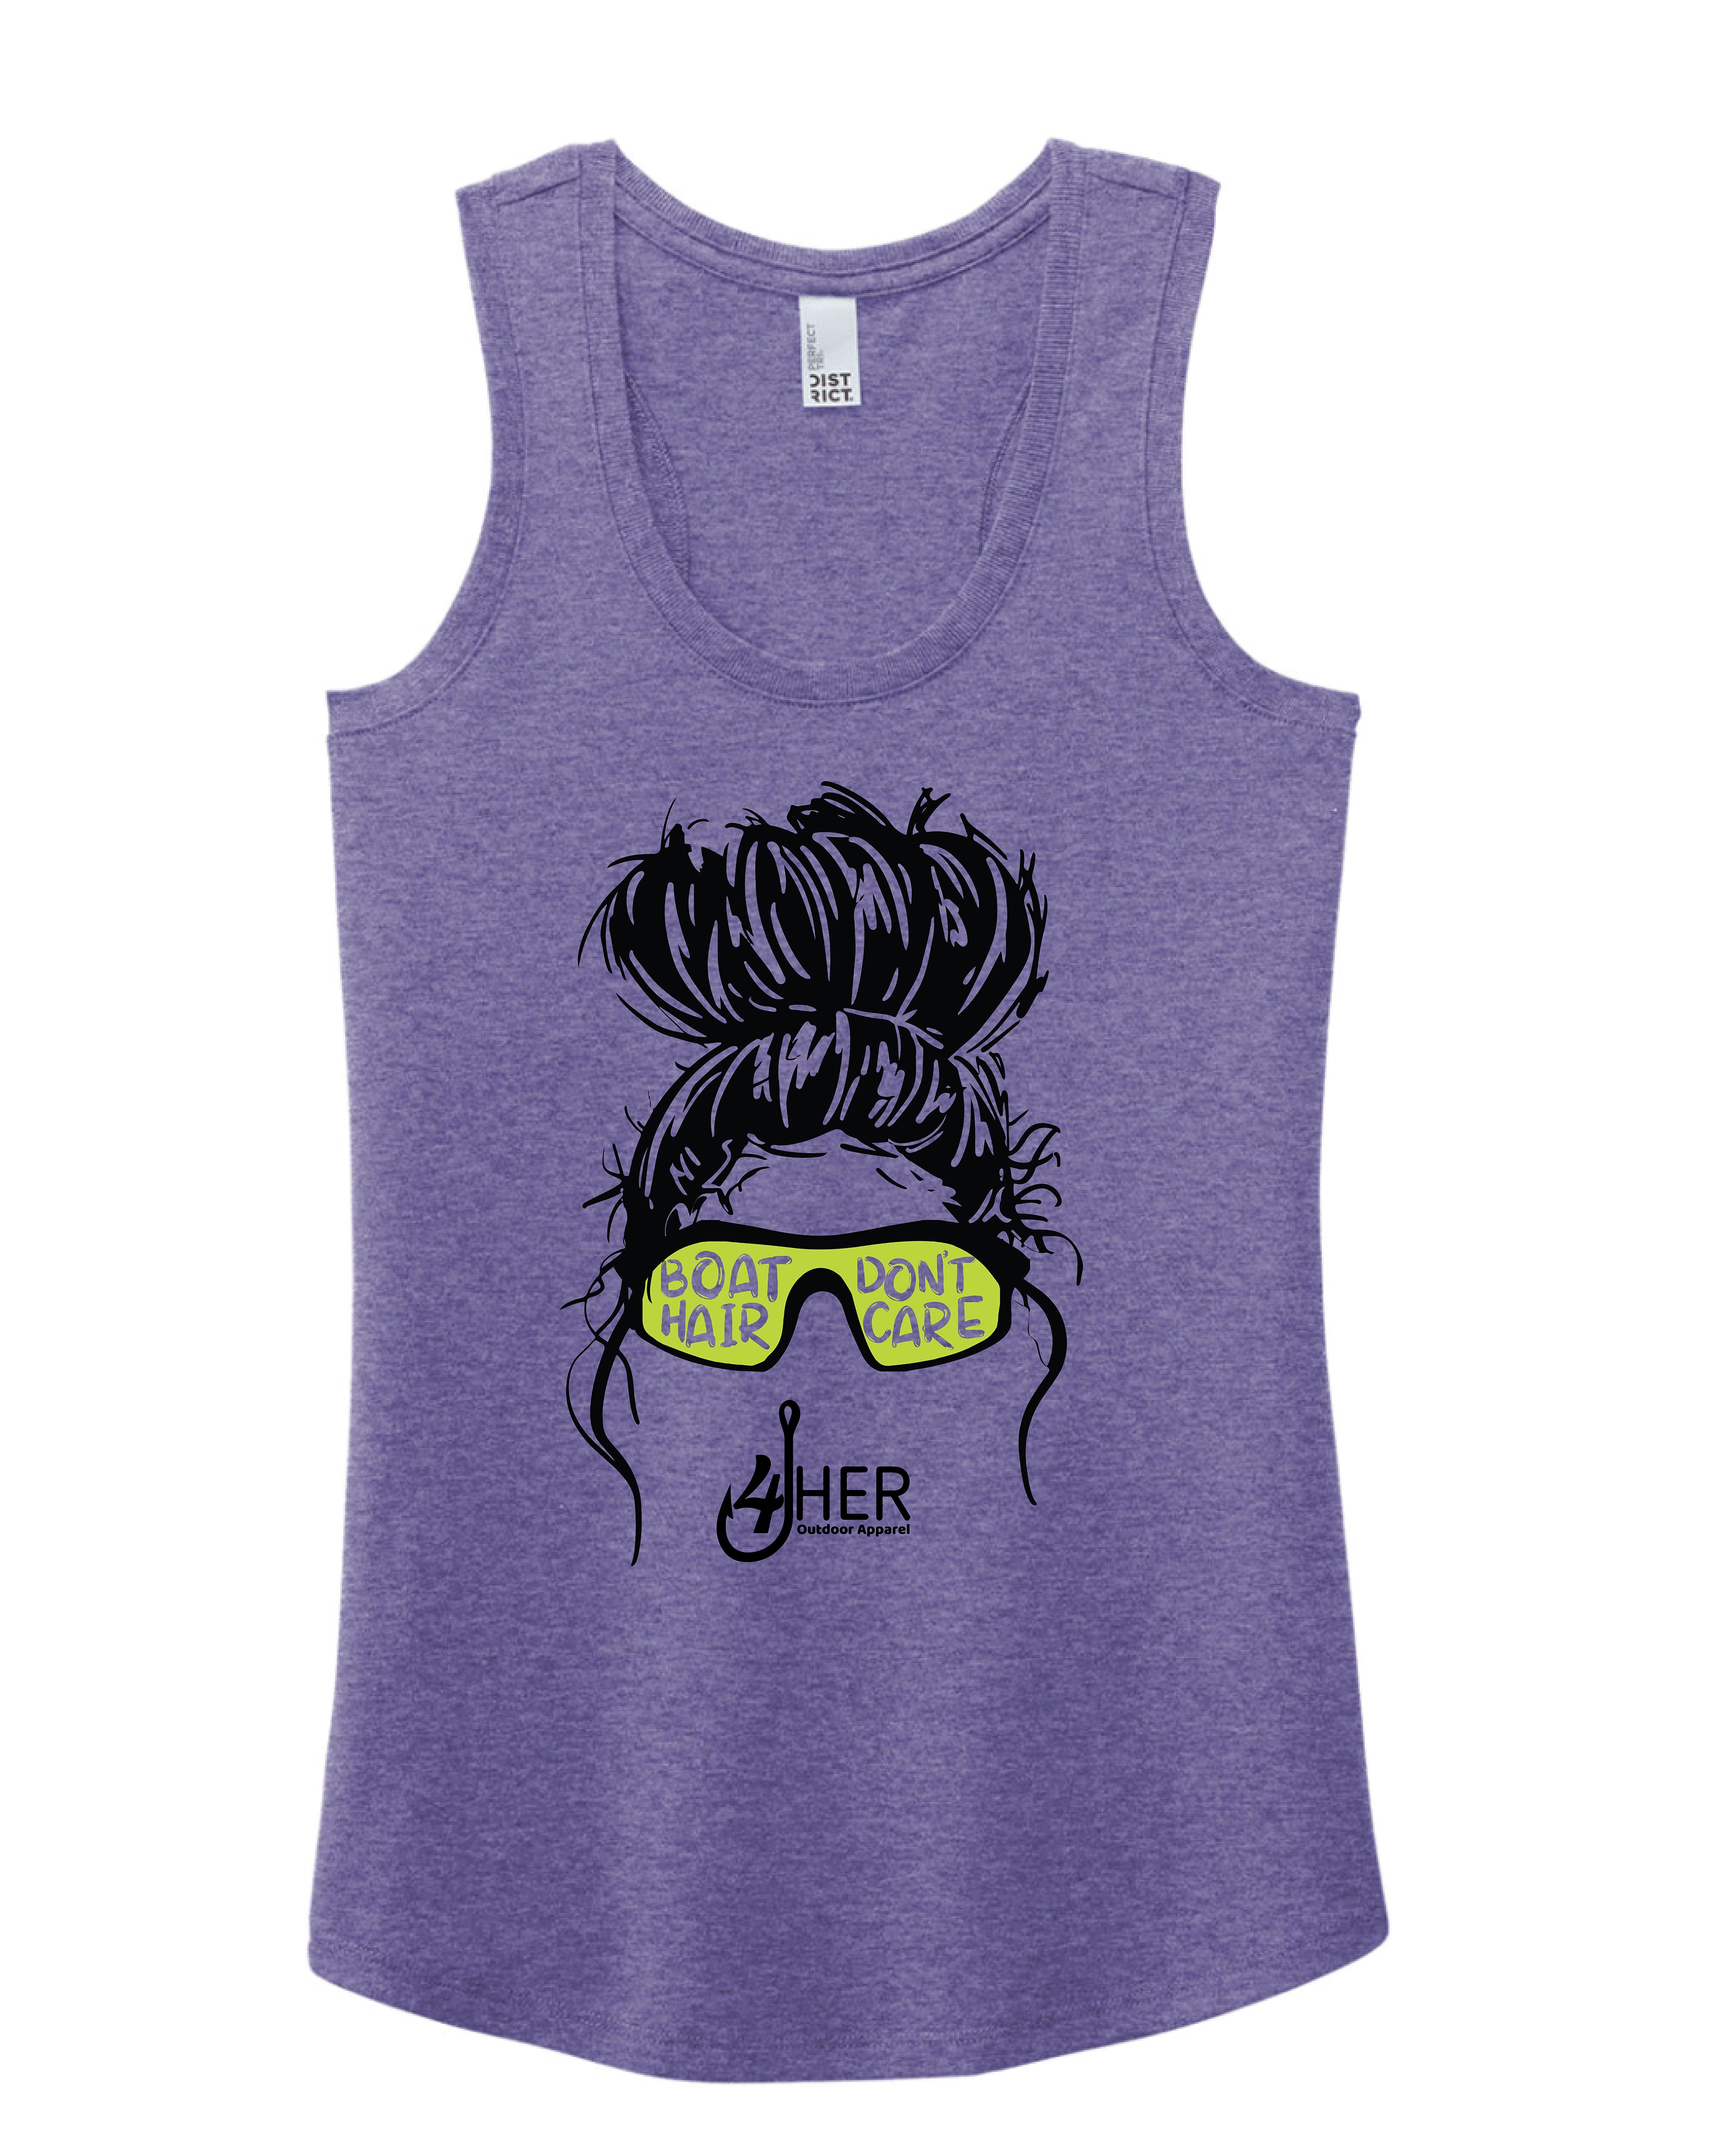 4HER Boat Hair Don't Care Tank